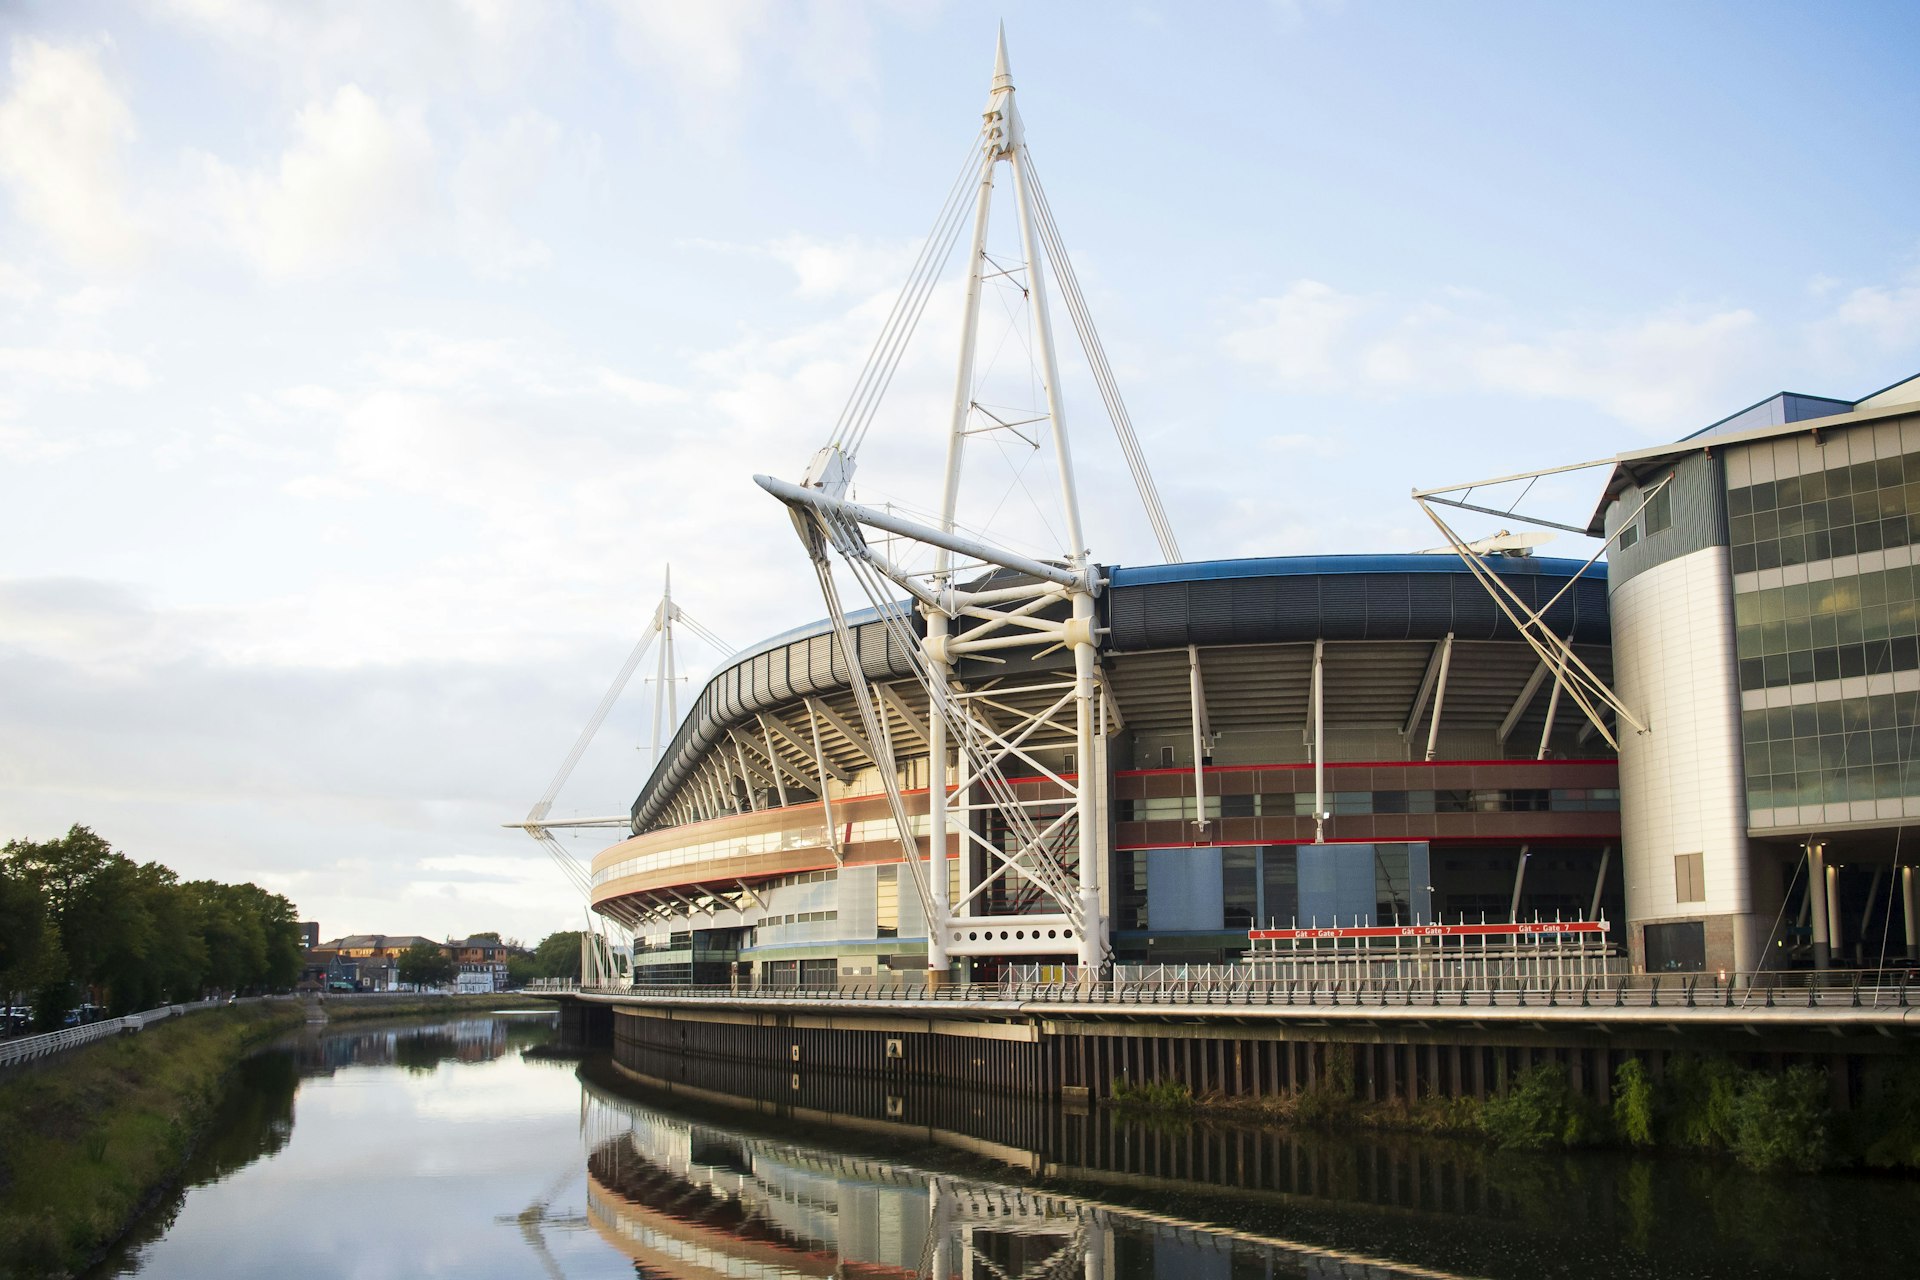 A view of the Principality Stadium in Cardiff, beside the River Taff. The large circular structure is reflected in the calm waters of the river.